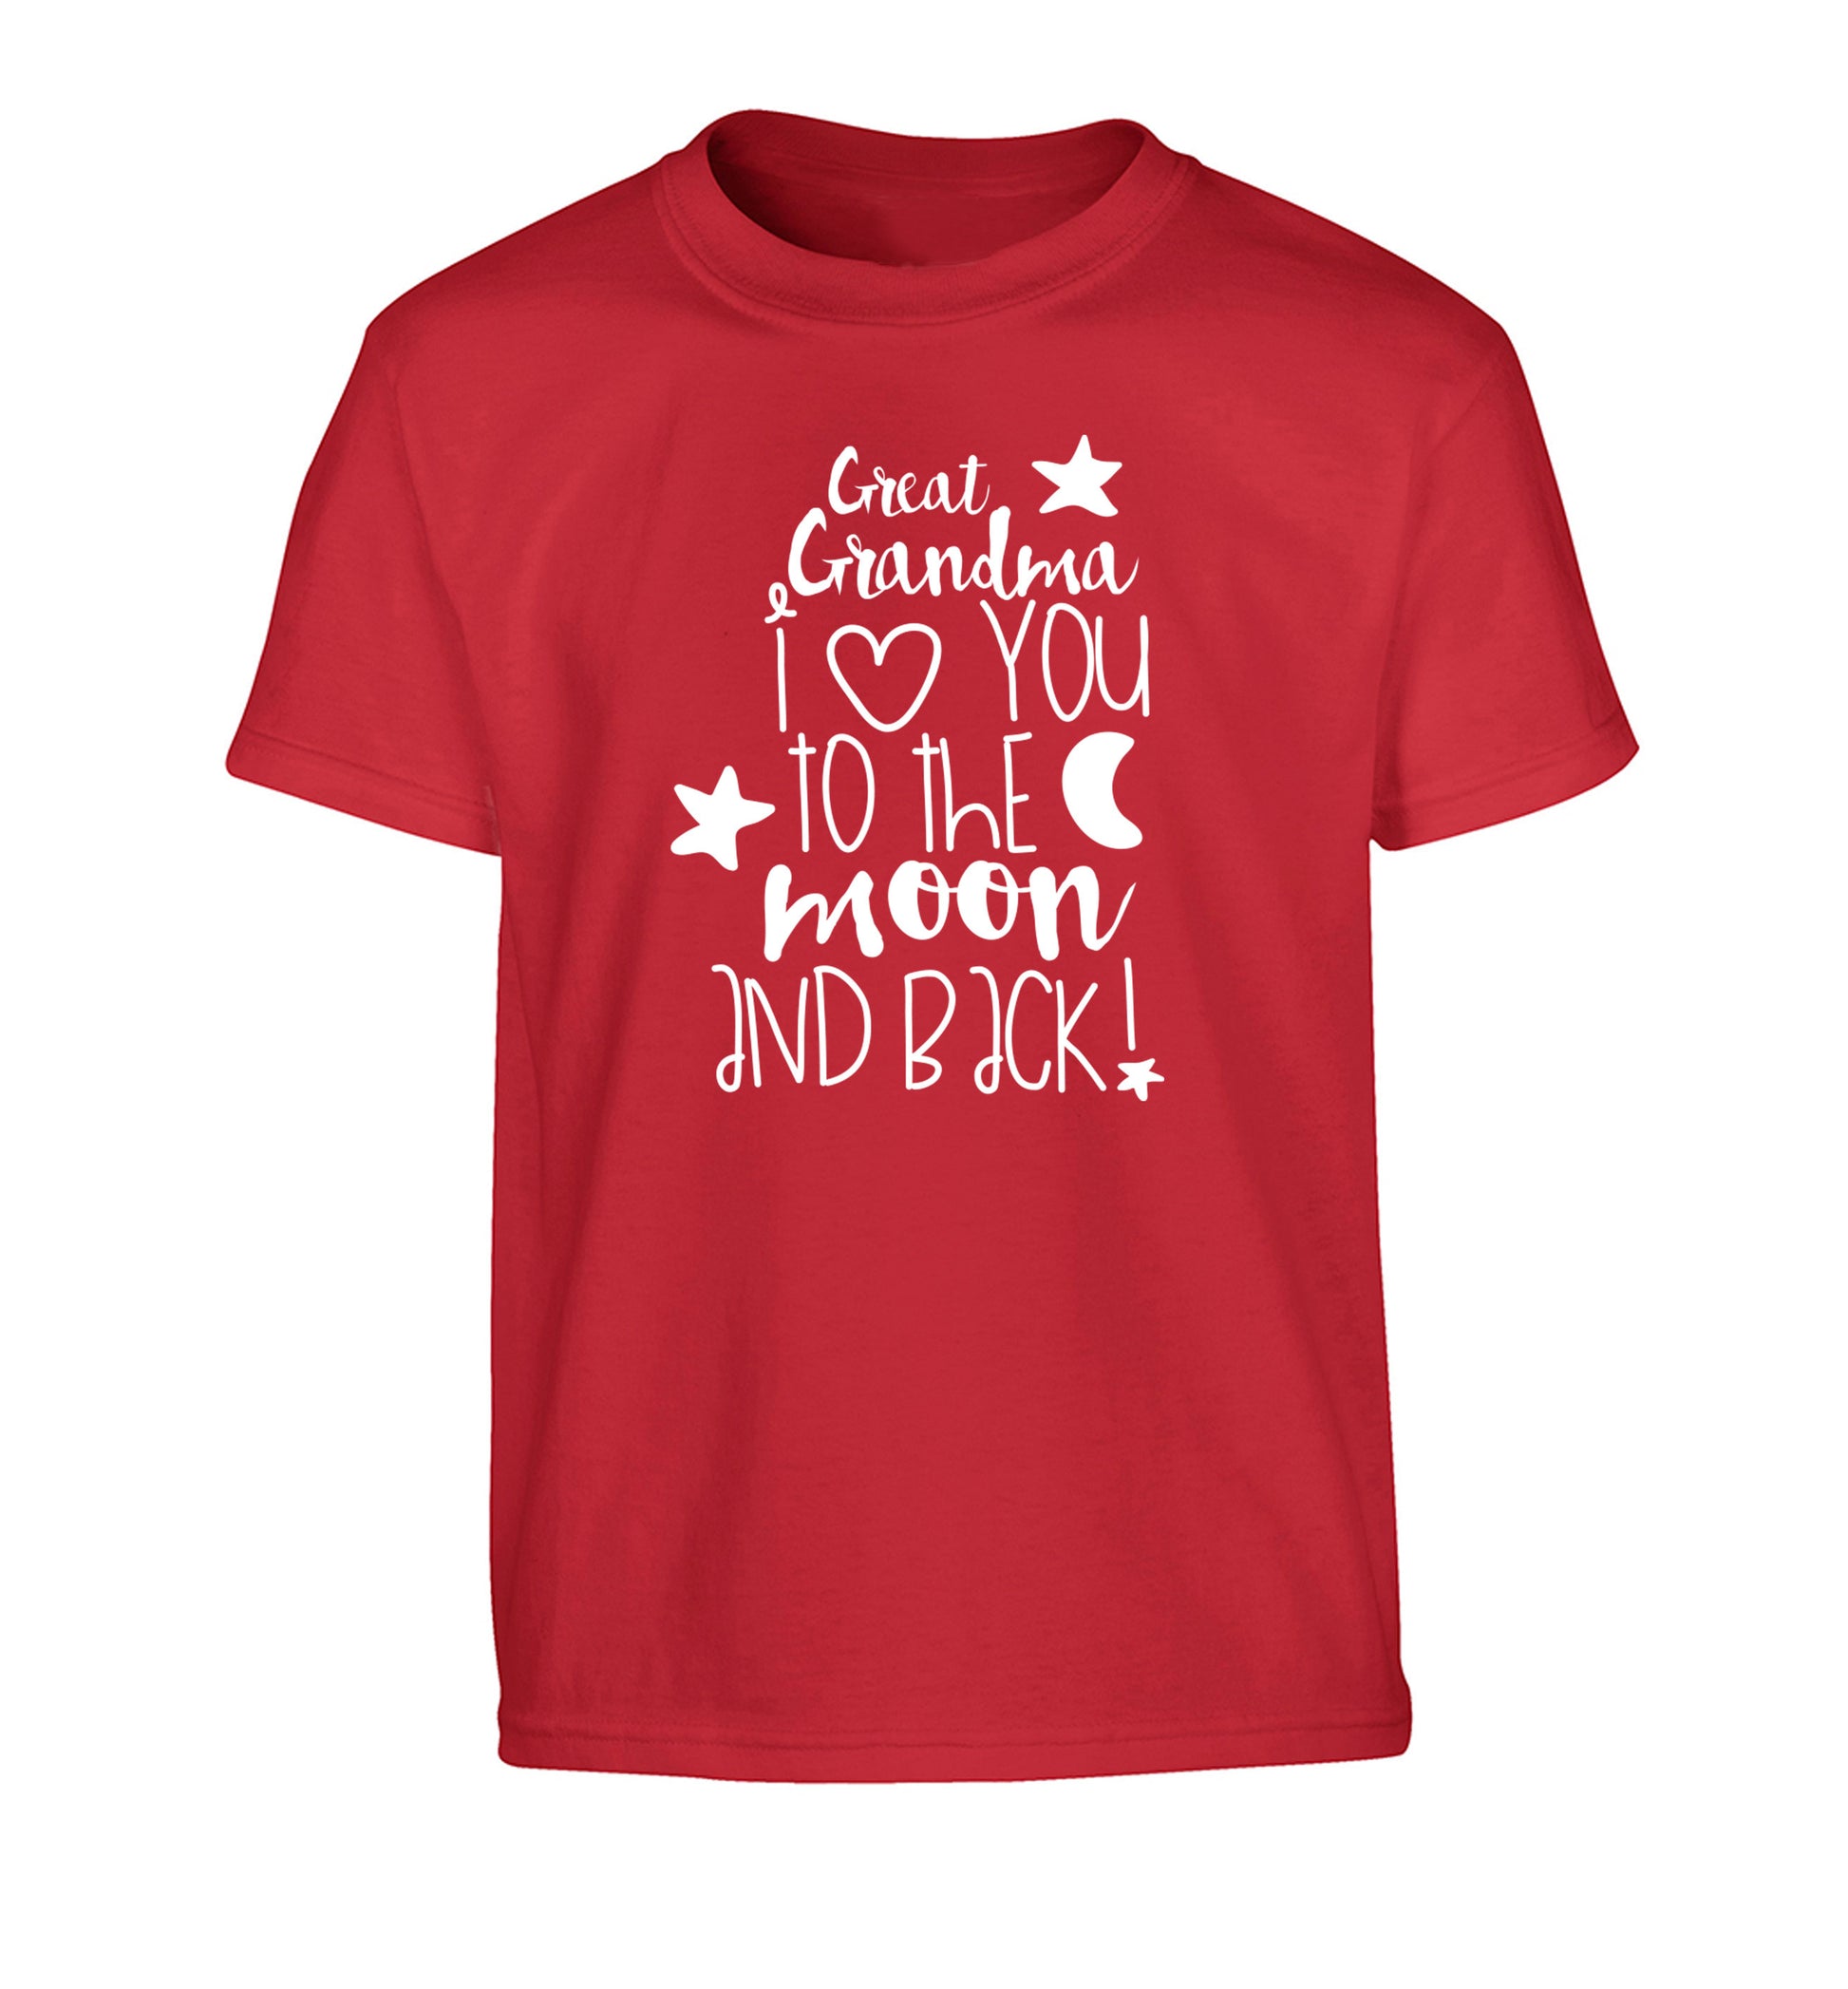 Great Grandma I love you to the moon and back Children's red Tshirt 12-14 Years